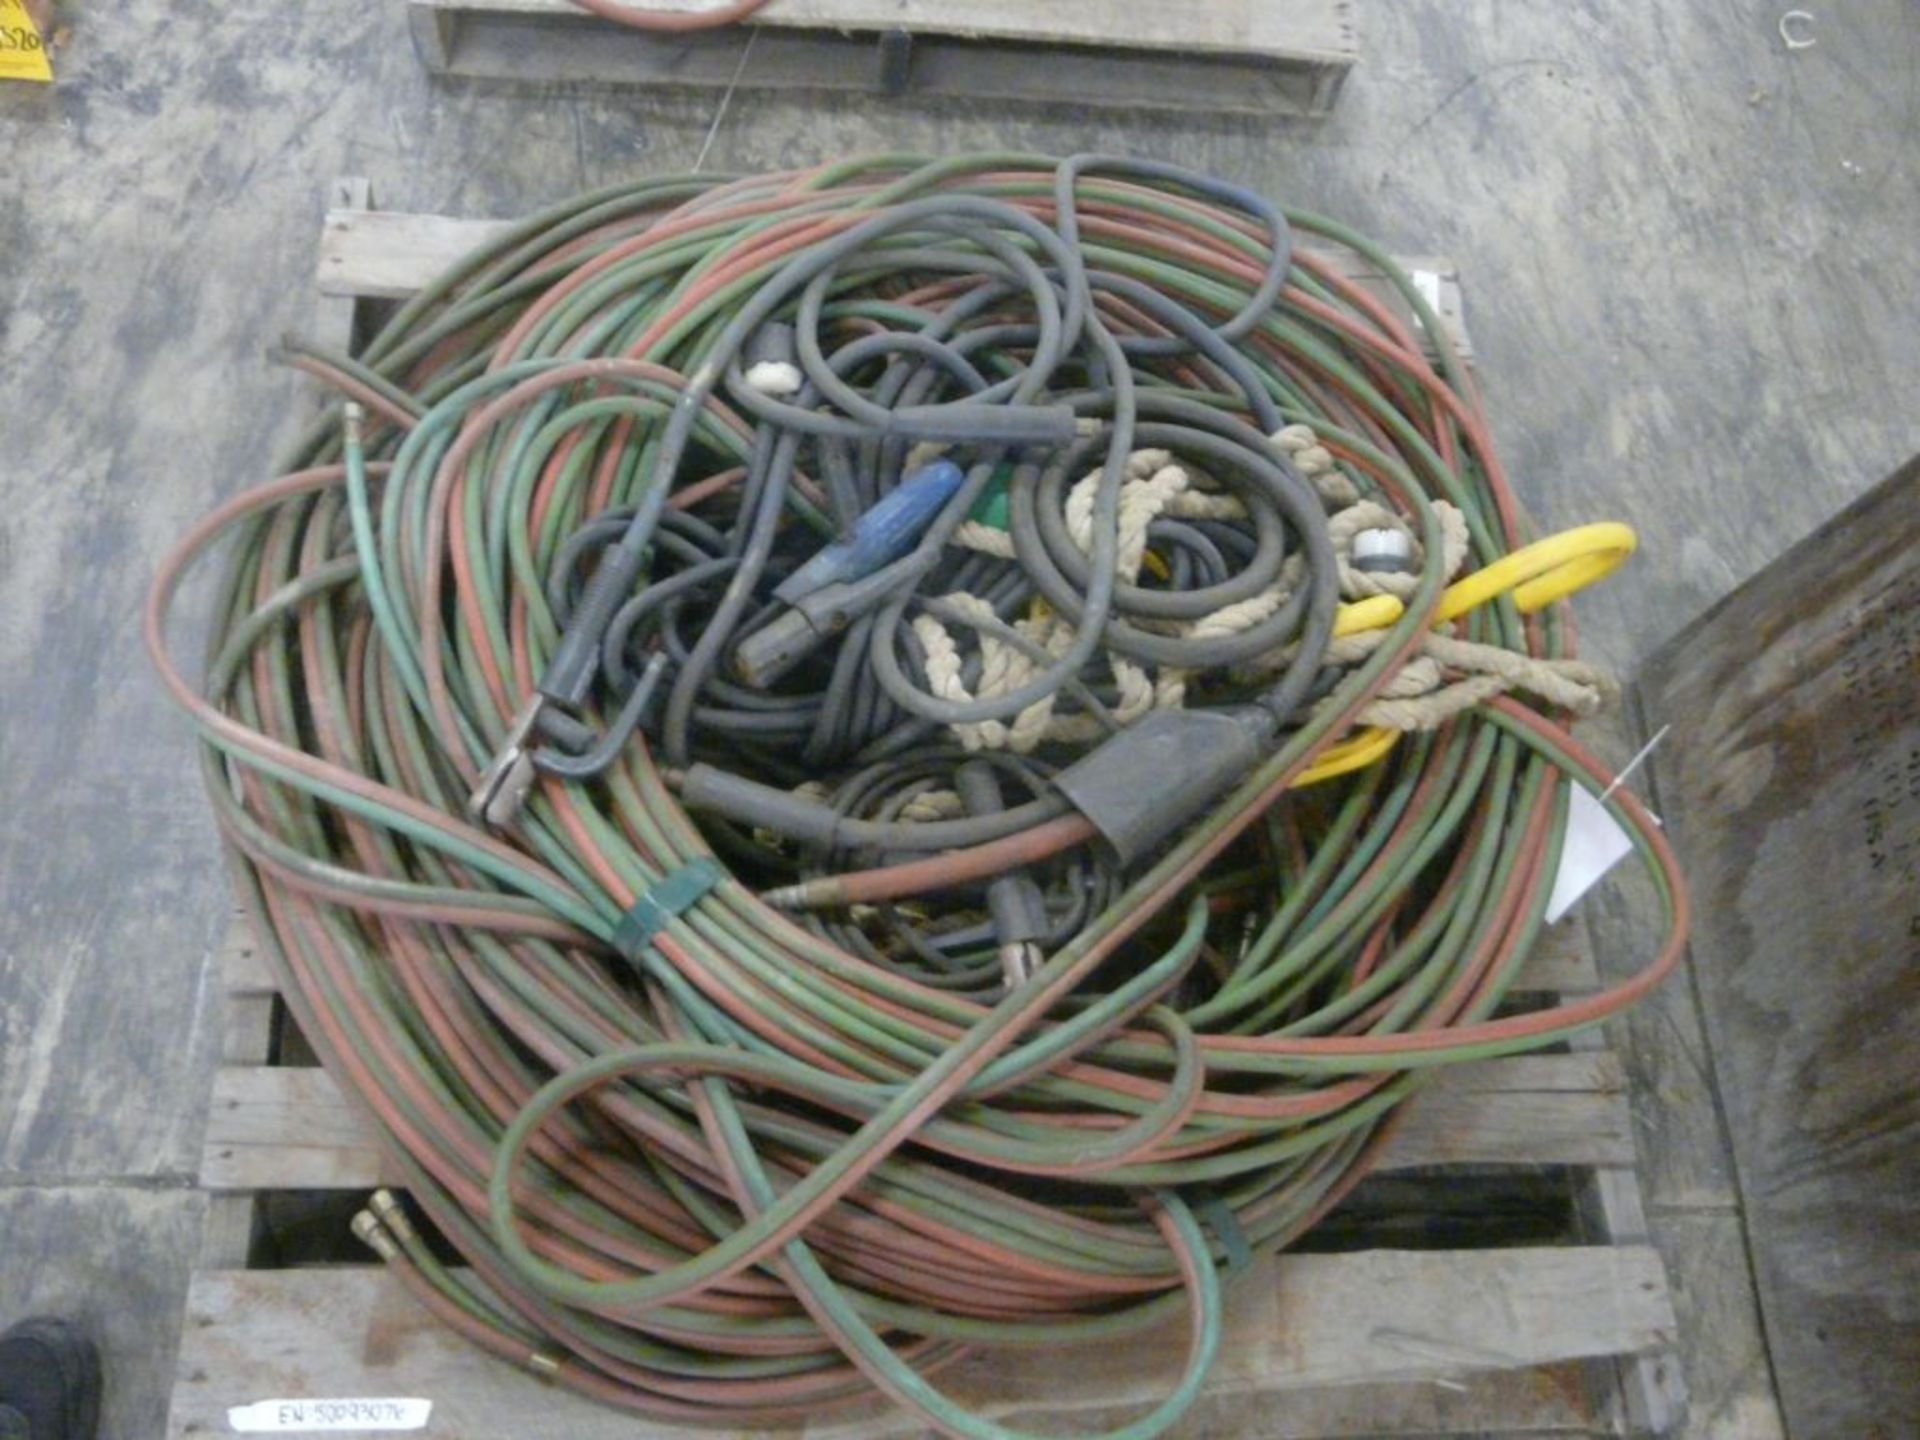 Lot of Assorted Leads, Power Cables, and Rope|144 lbs Including Pallet; Tag: 225338